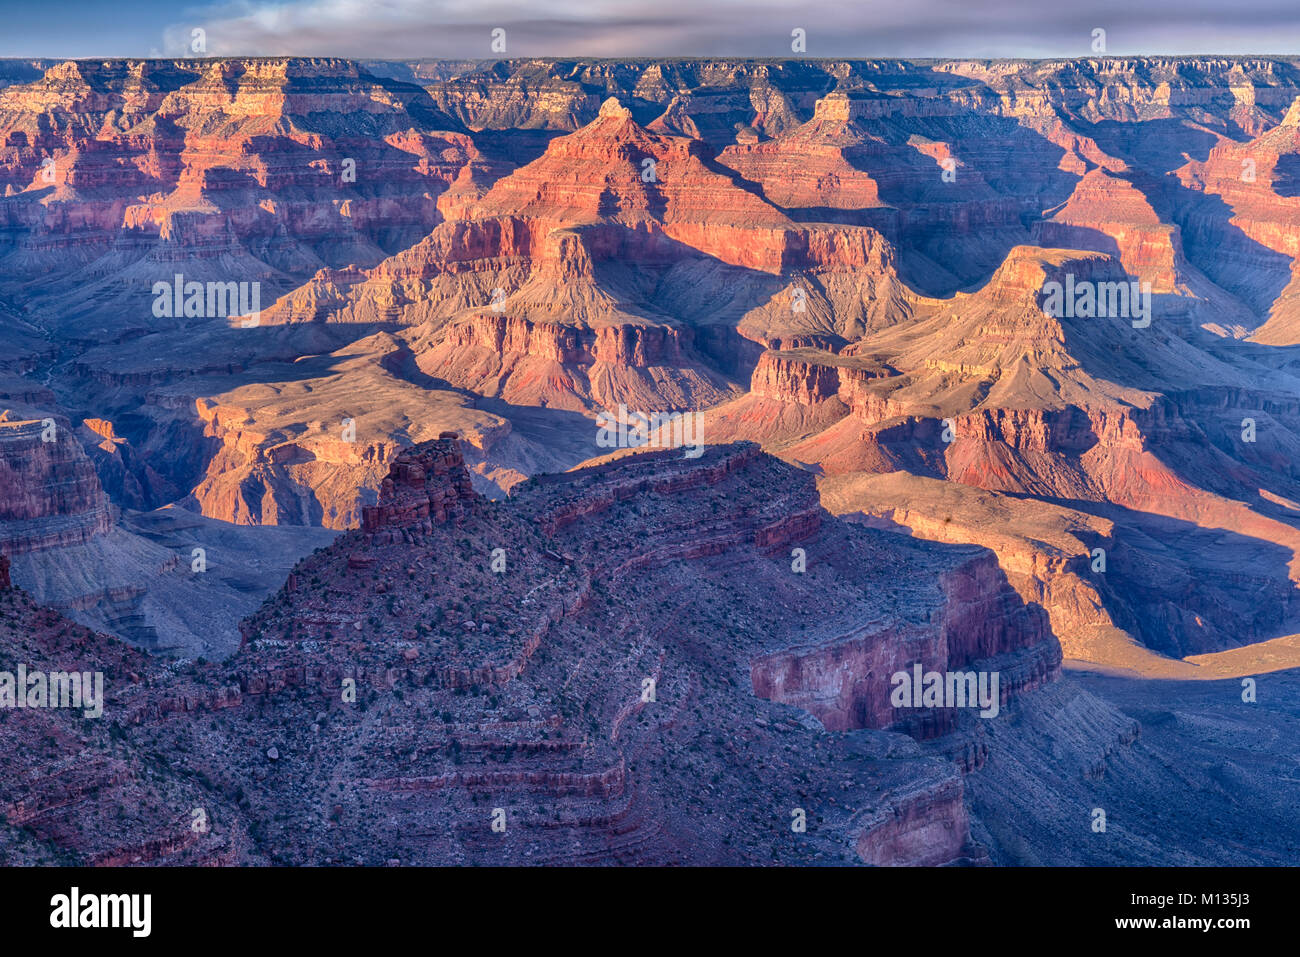 Scenic View of the Grand Canyon, Arizona from the South Rim Stock Photo